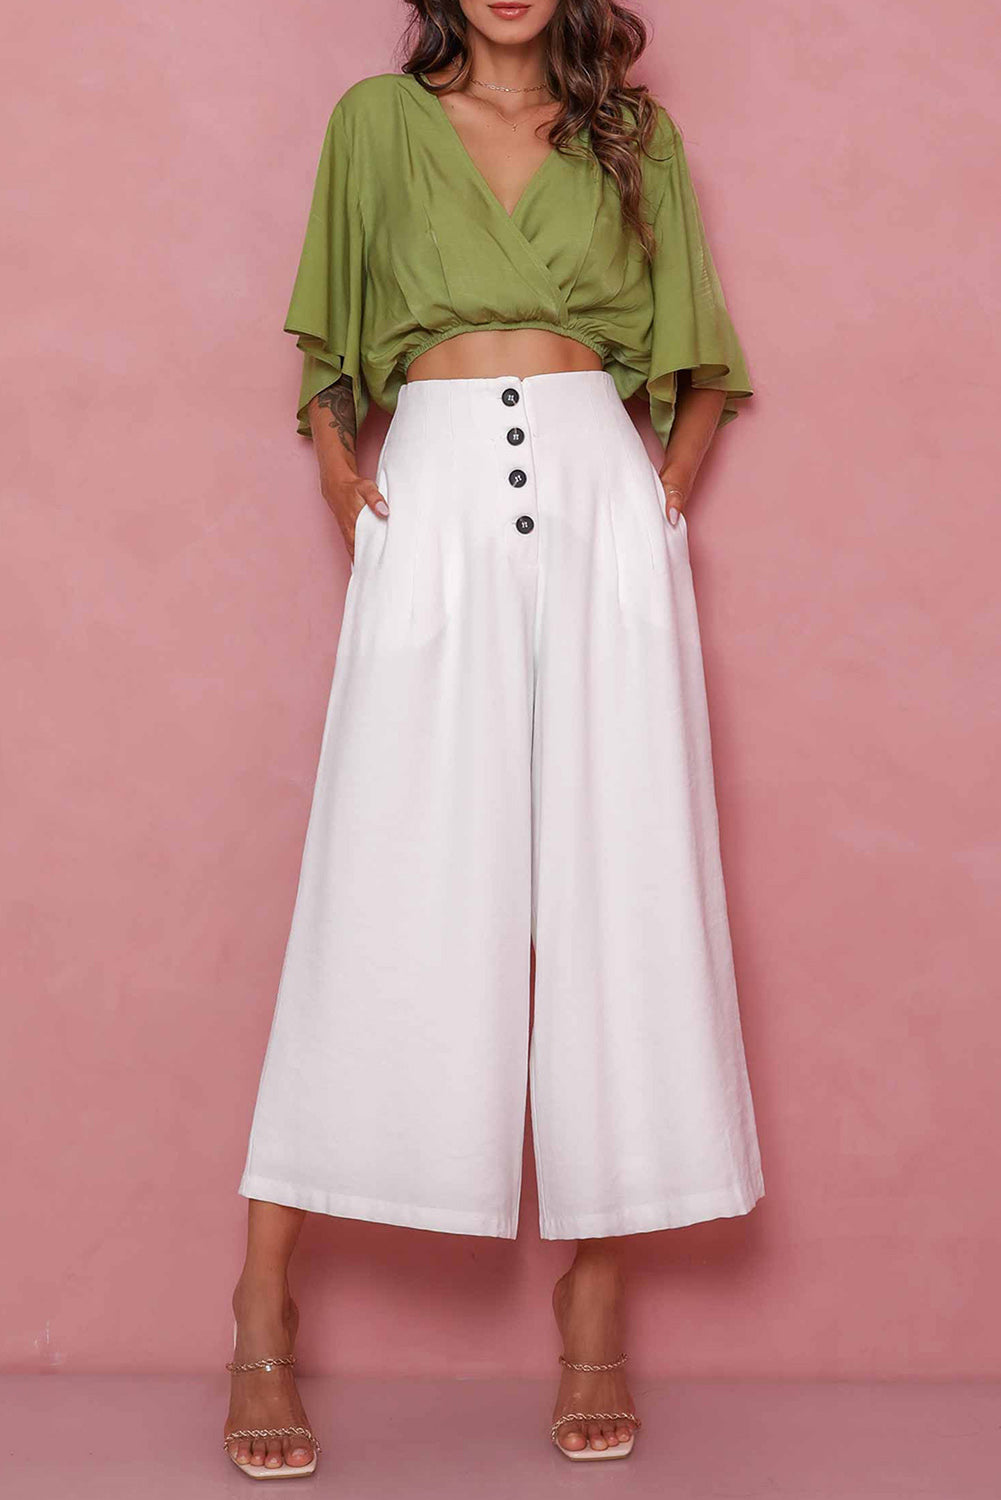 A pair of white cropped wide leg pants with button detailing - perfect for a smart casual look.